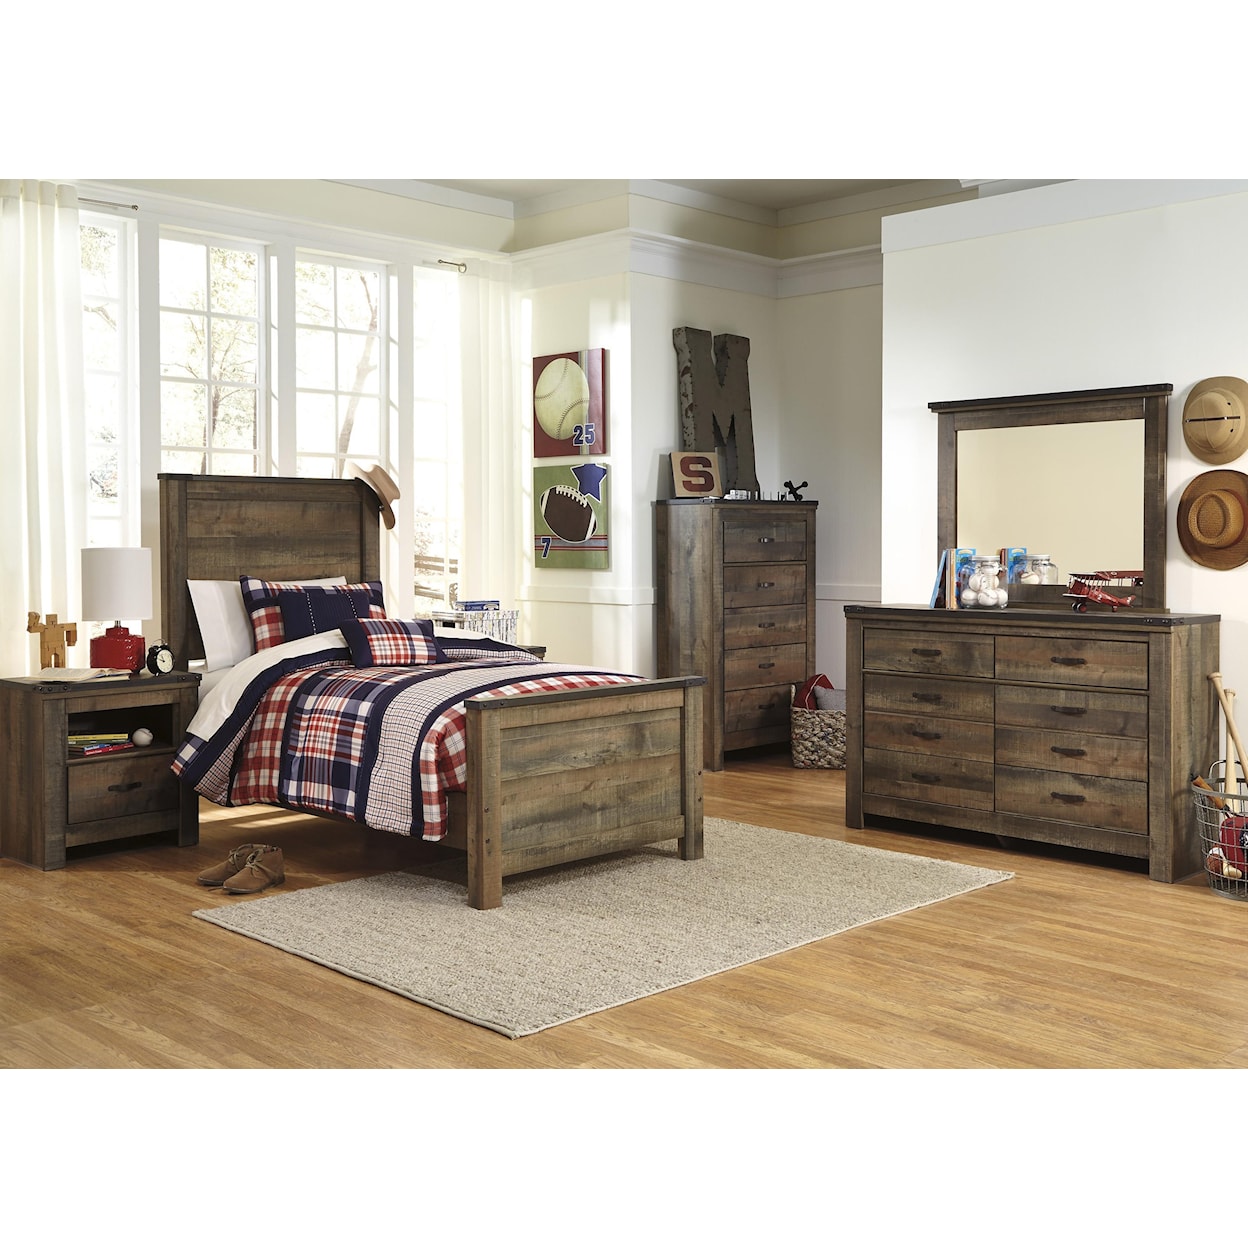 Signature Design by Ashley Trinell Twin 5 Piece Bedroom Group